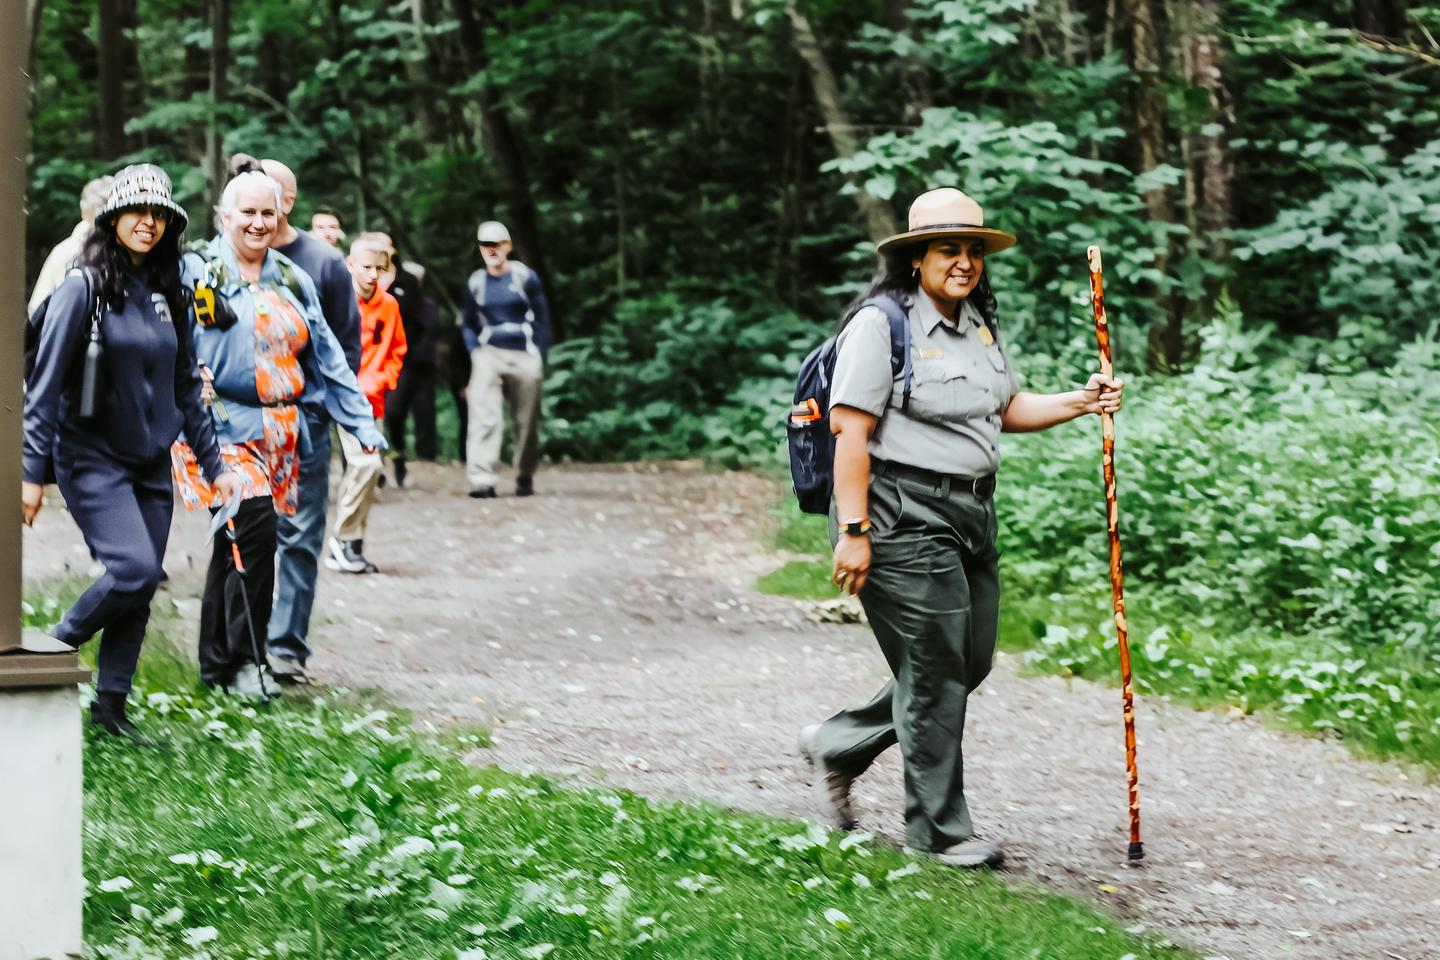 A park ranger is leading a group of hikers along a dirt train in a wooded area.Hiking the Lackawanna River Heritage Trail